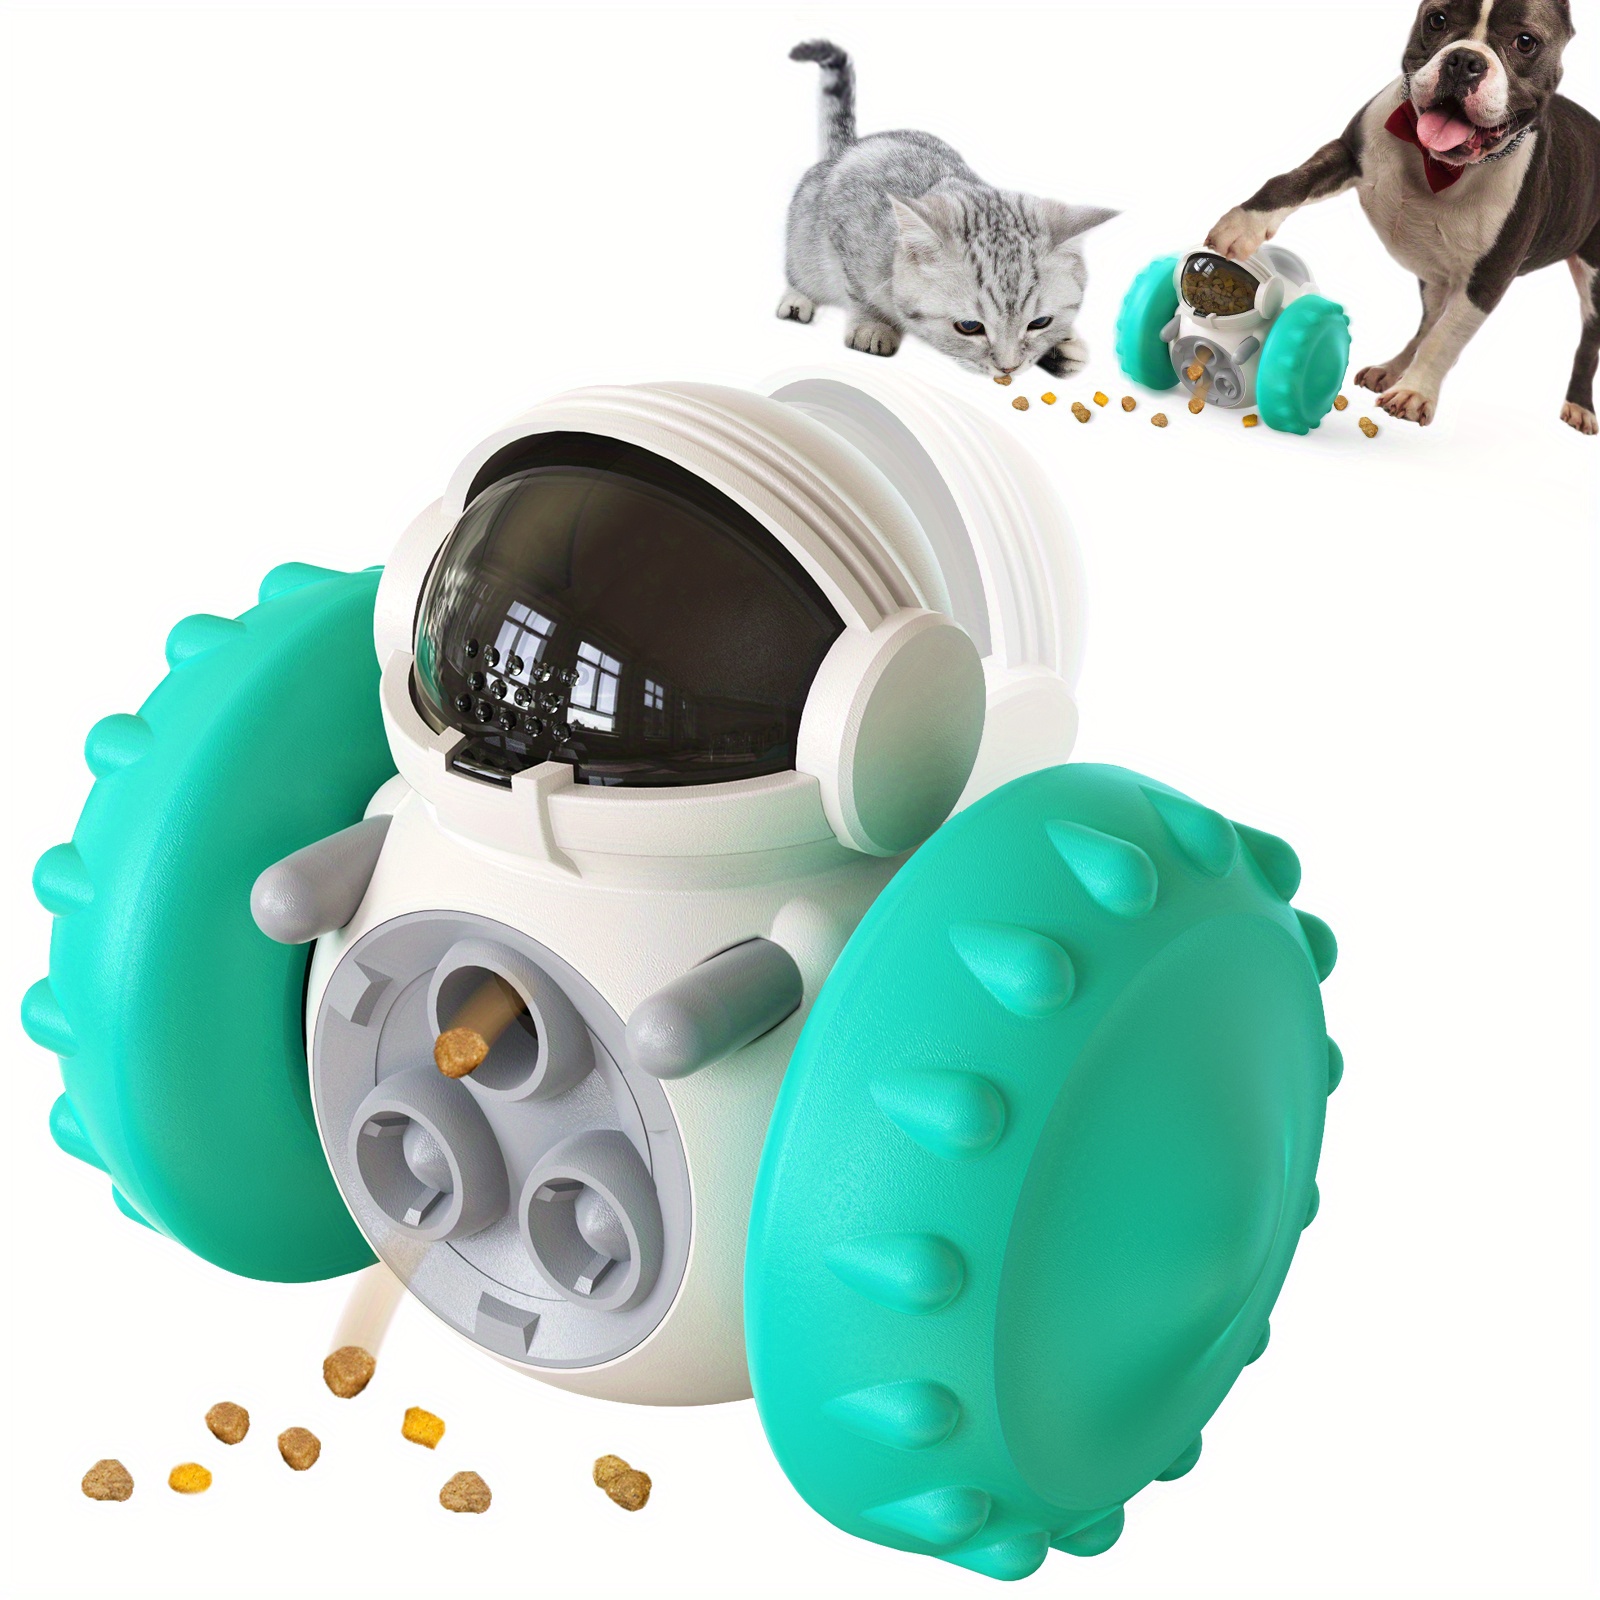 Are Squeaky Toys Too Stimulating For Your Dog? - Puppy Leaks